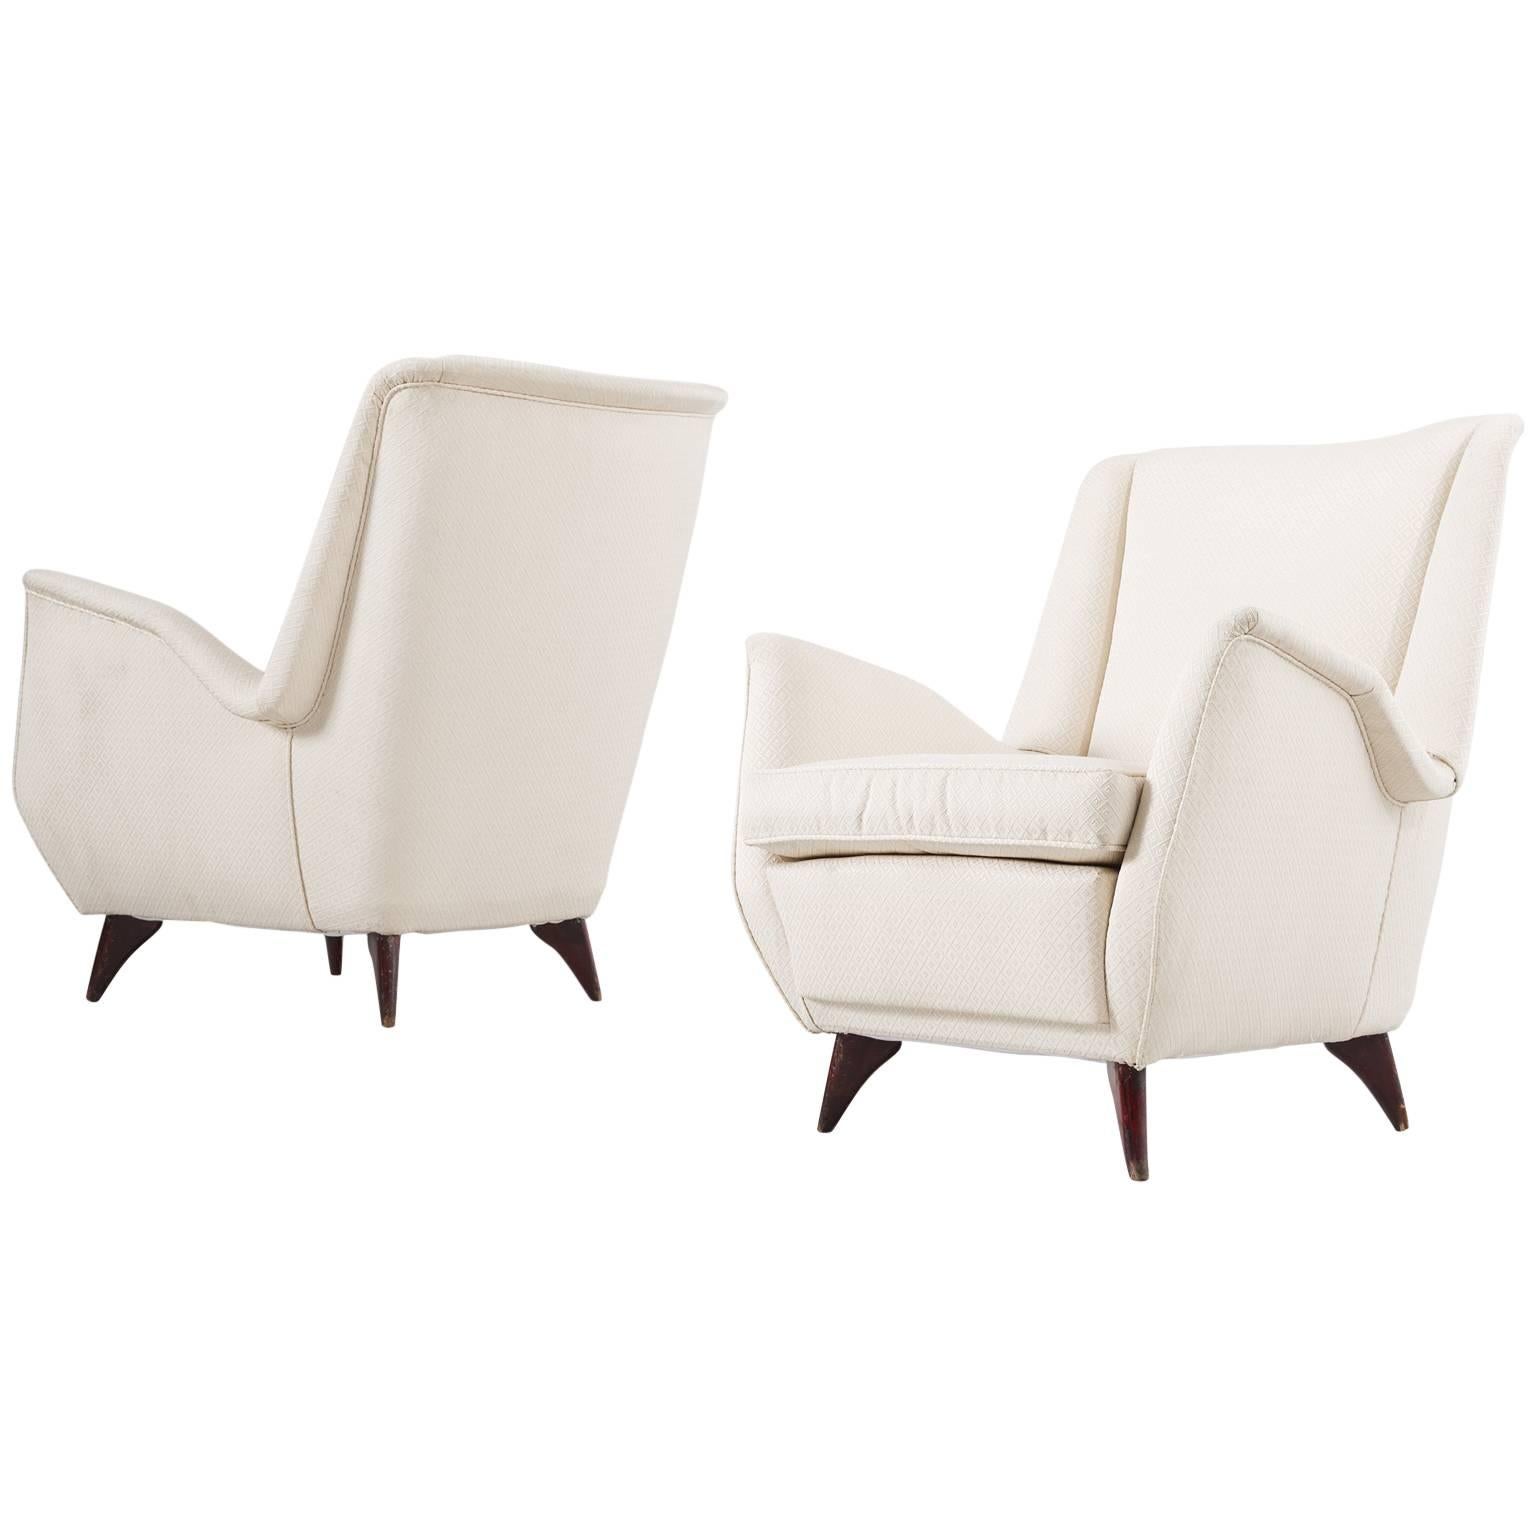 Set of Two Italian Lounge Chairs in off-White Fabric